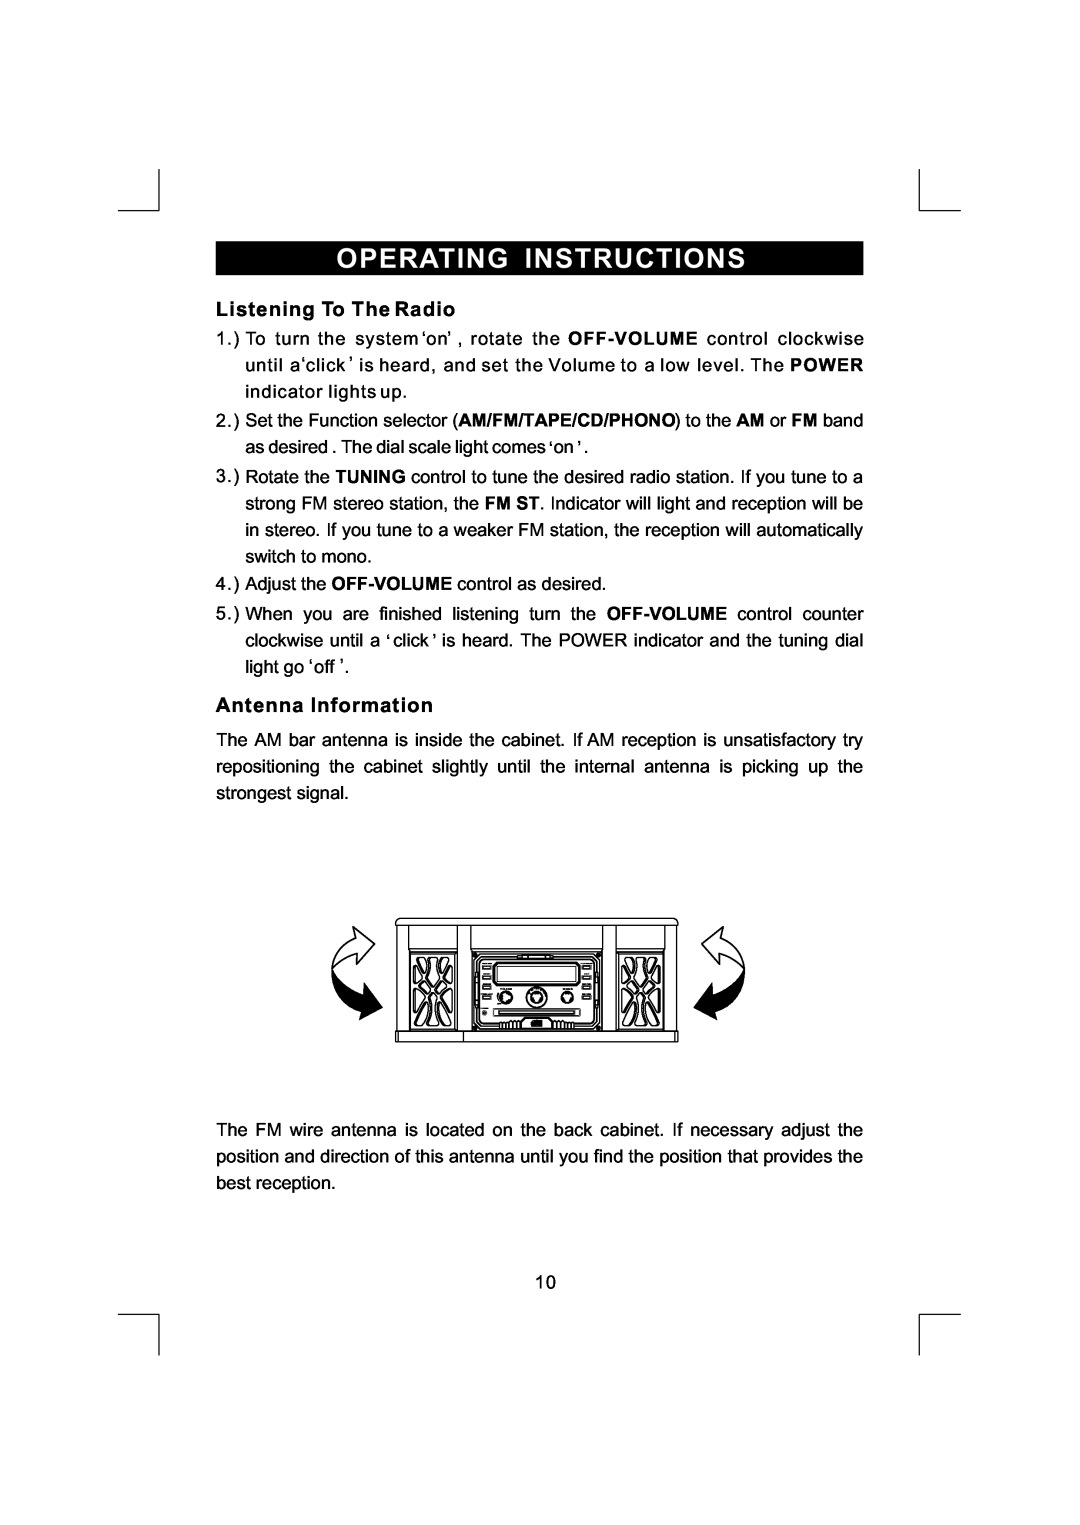 Emerson NR290TTC owner manual Operating Instructions, Listening To The Radio, Antenna Information 